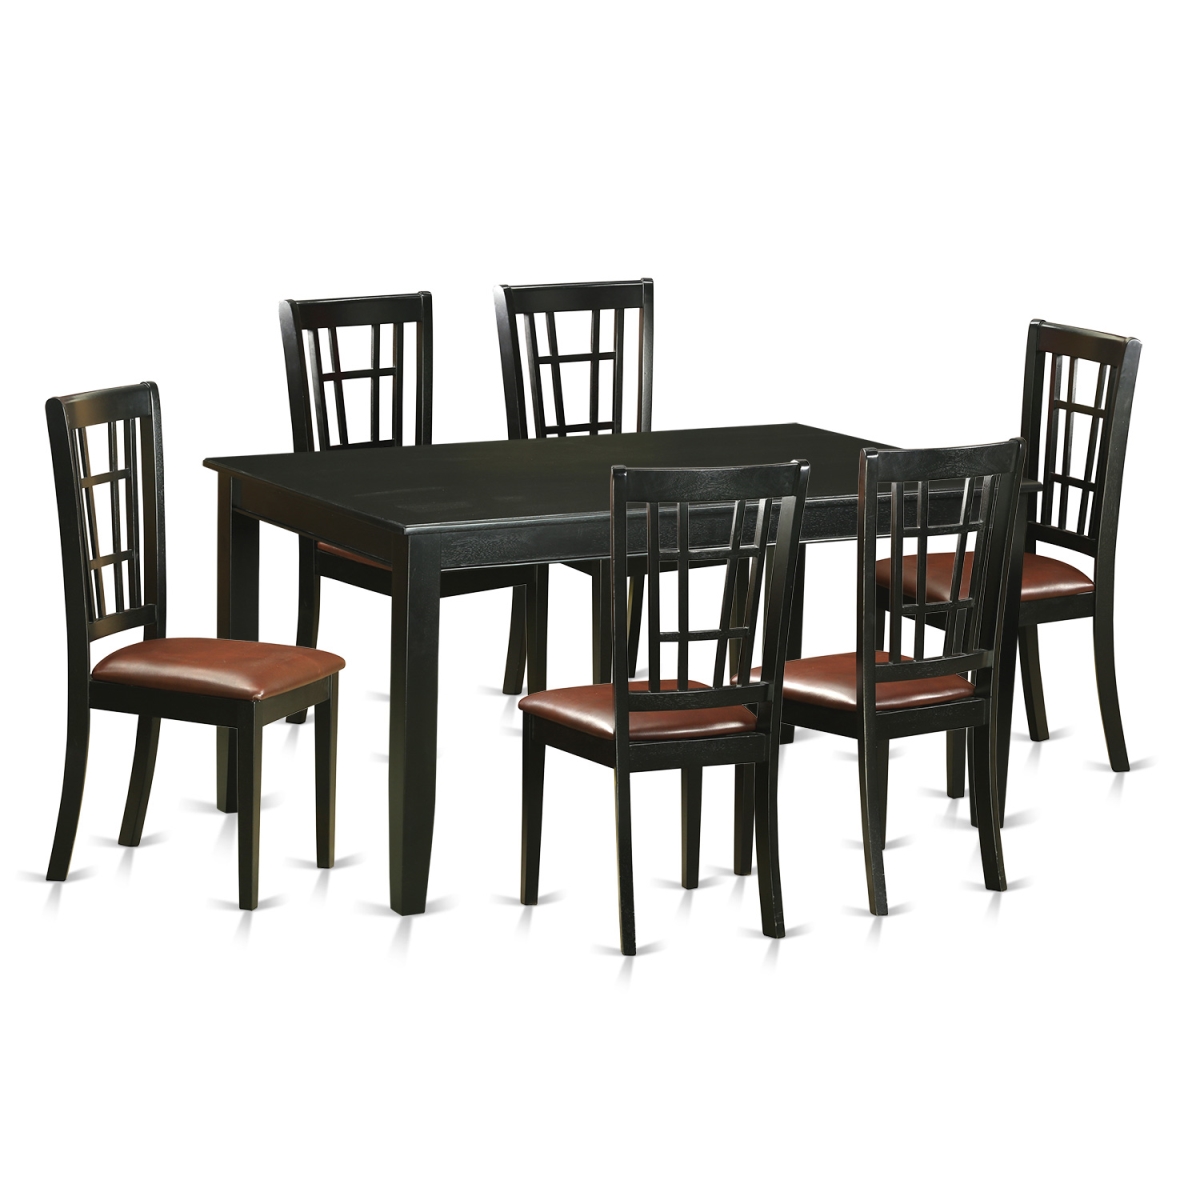 Duni7-blk-lc Dinette Table Set With 6 Kitchen Table & 6 Chairs, Black - 7 Piece